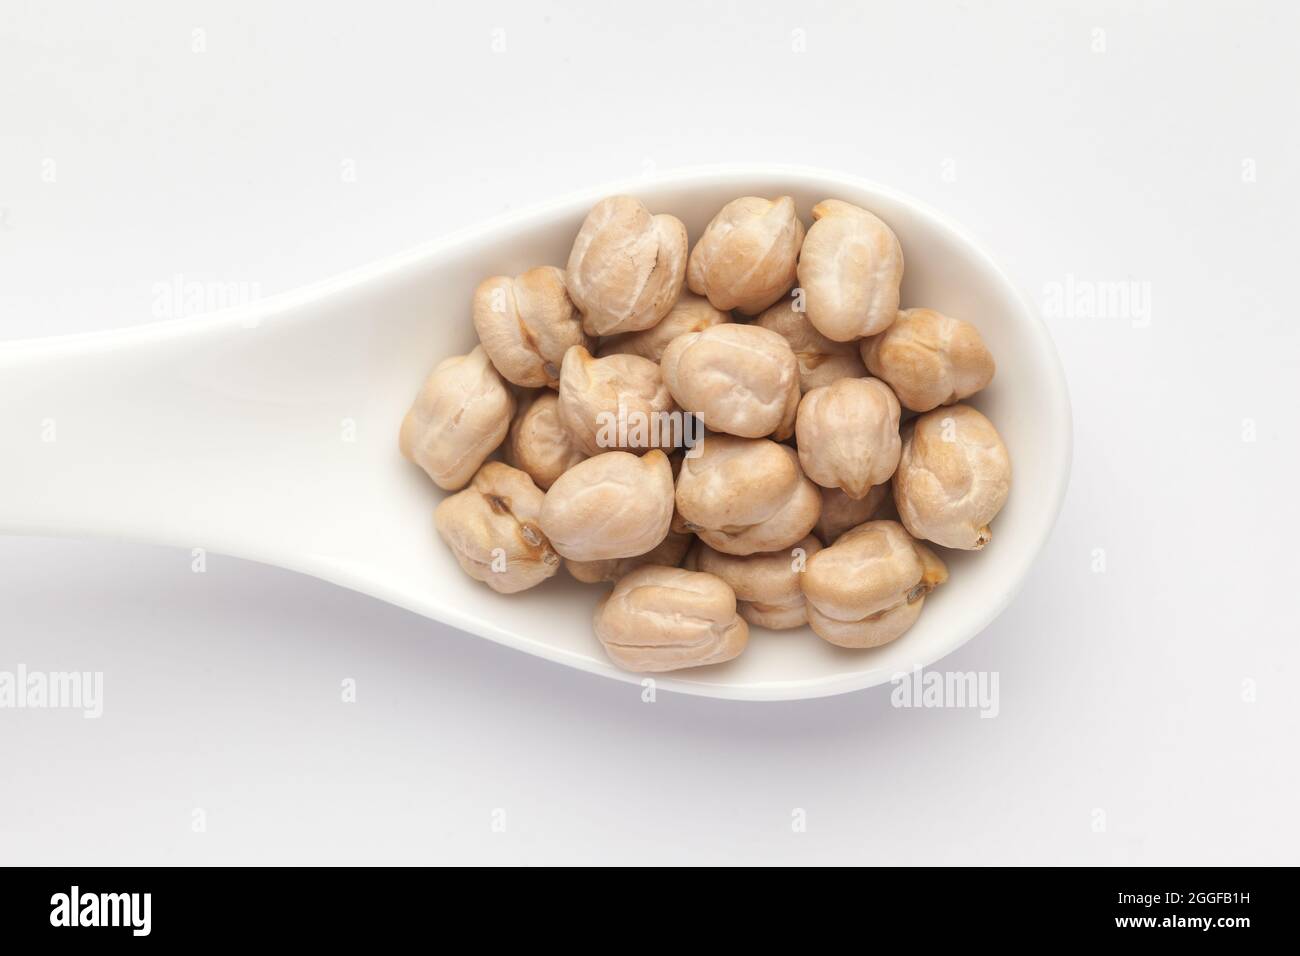 Macro Close-up of Organic chhole chana or Kabuli chana (Cicer arietinum) or whole white Bengal gram dal on a white ceramic soup spoon. Top view Stock Photo